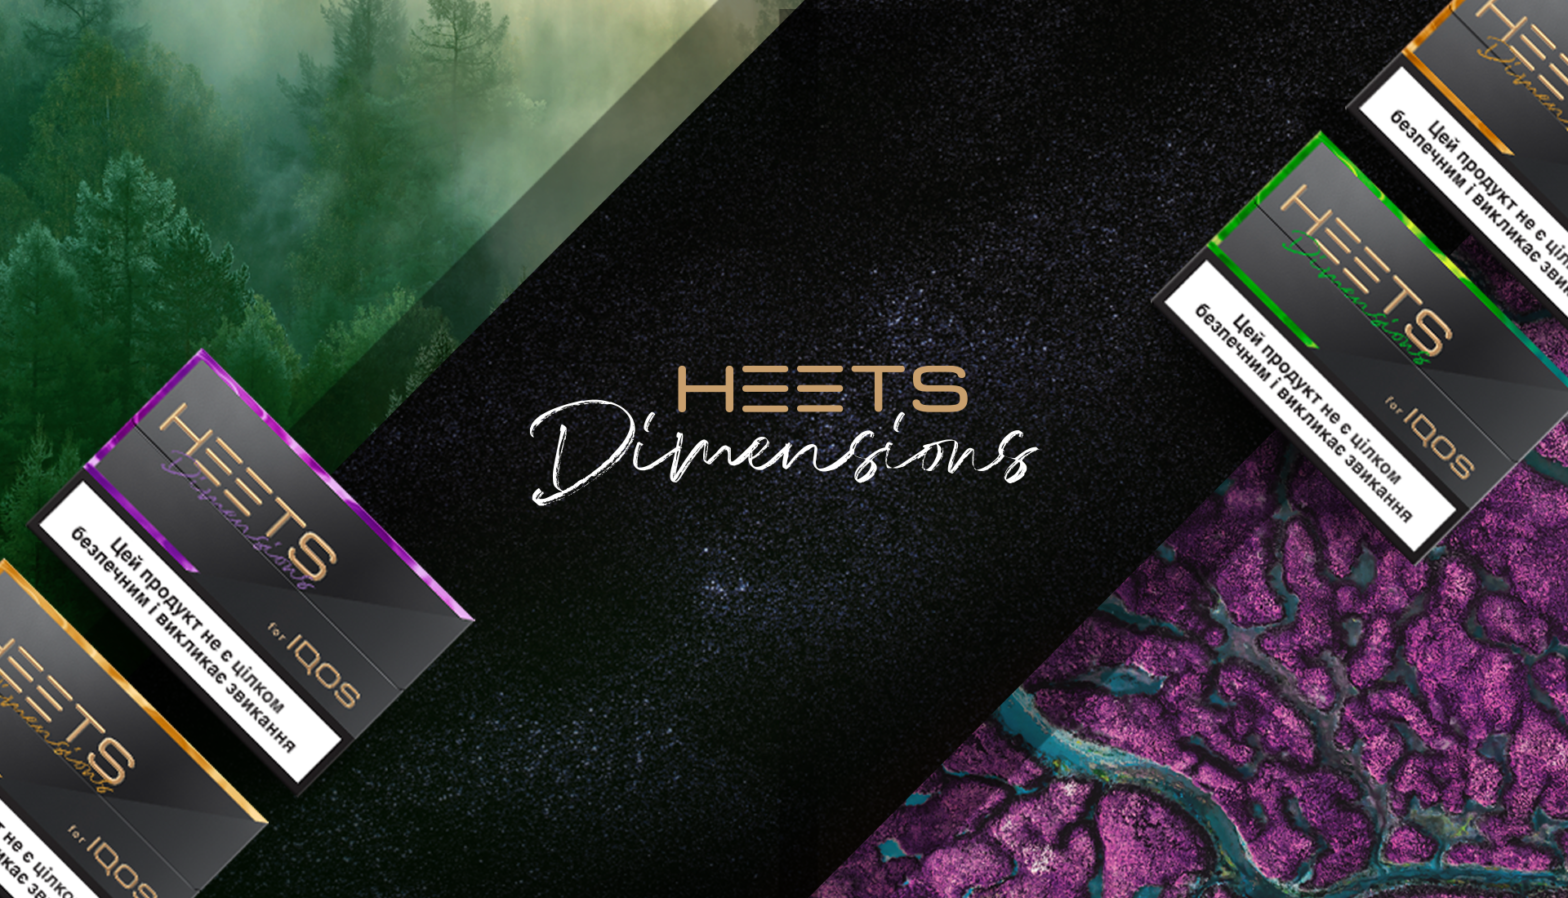 Where Should You Buy HEETS Dimensions?